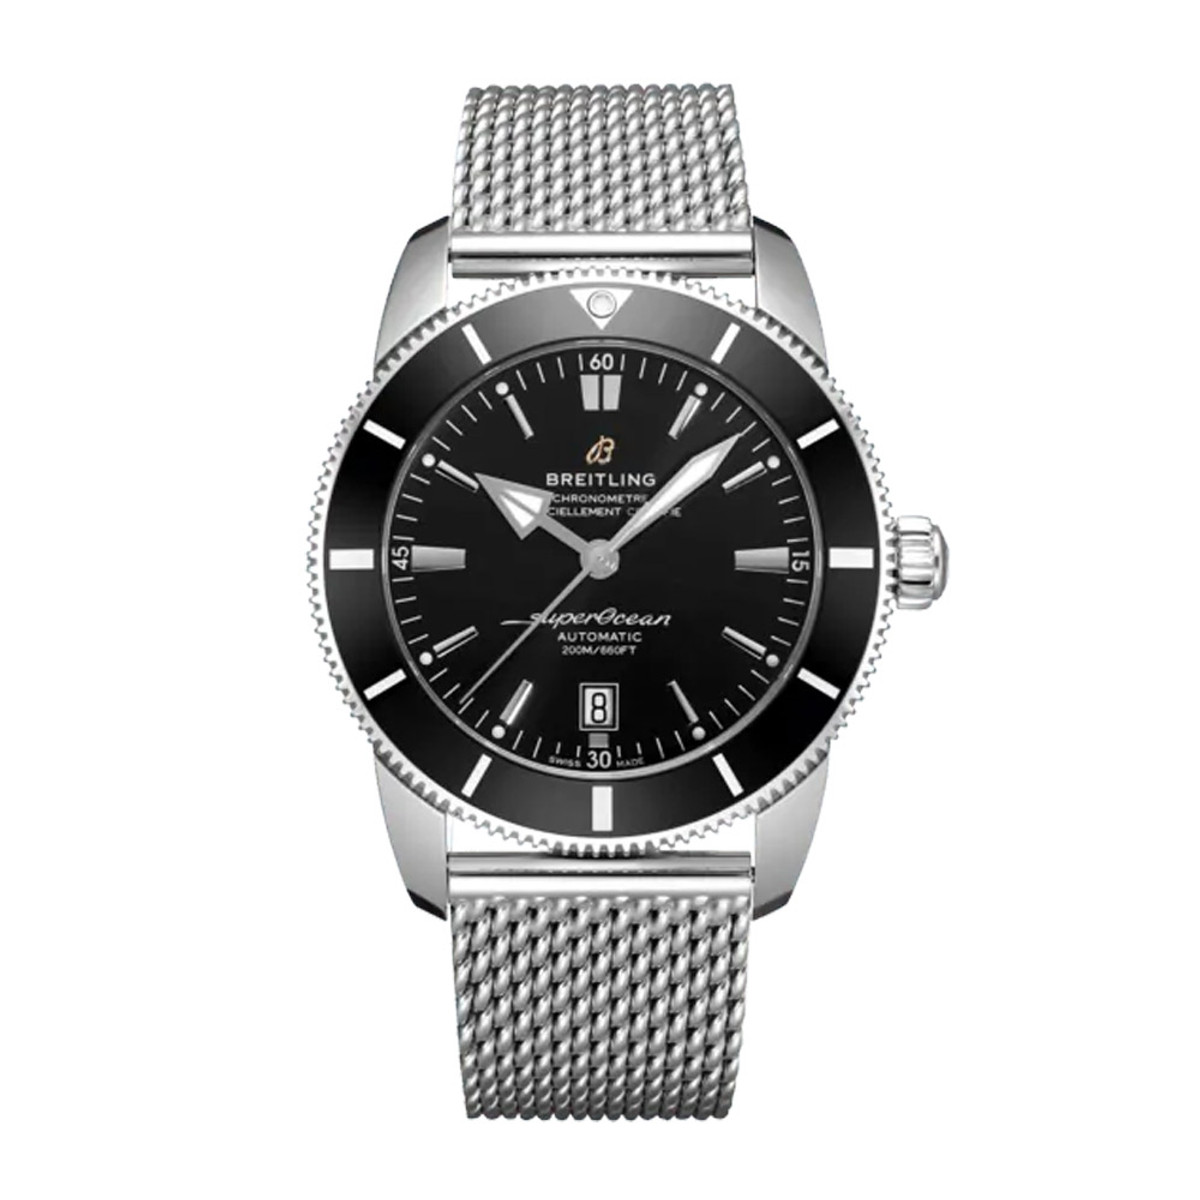 Breitling Superocean 46 Heritage B20 Automatic AB2020121B1A1-WBTG1825 Product Image